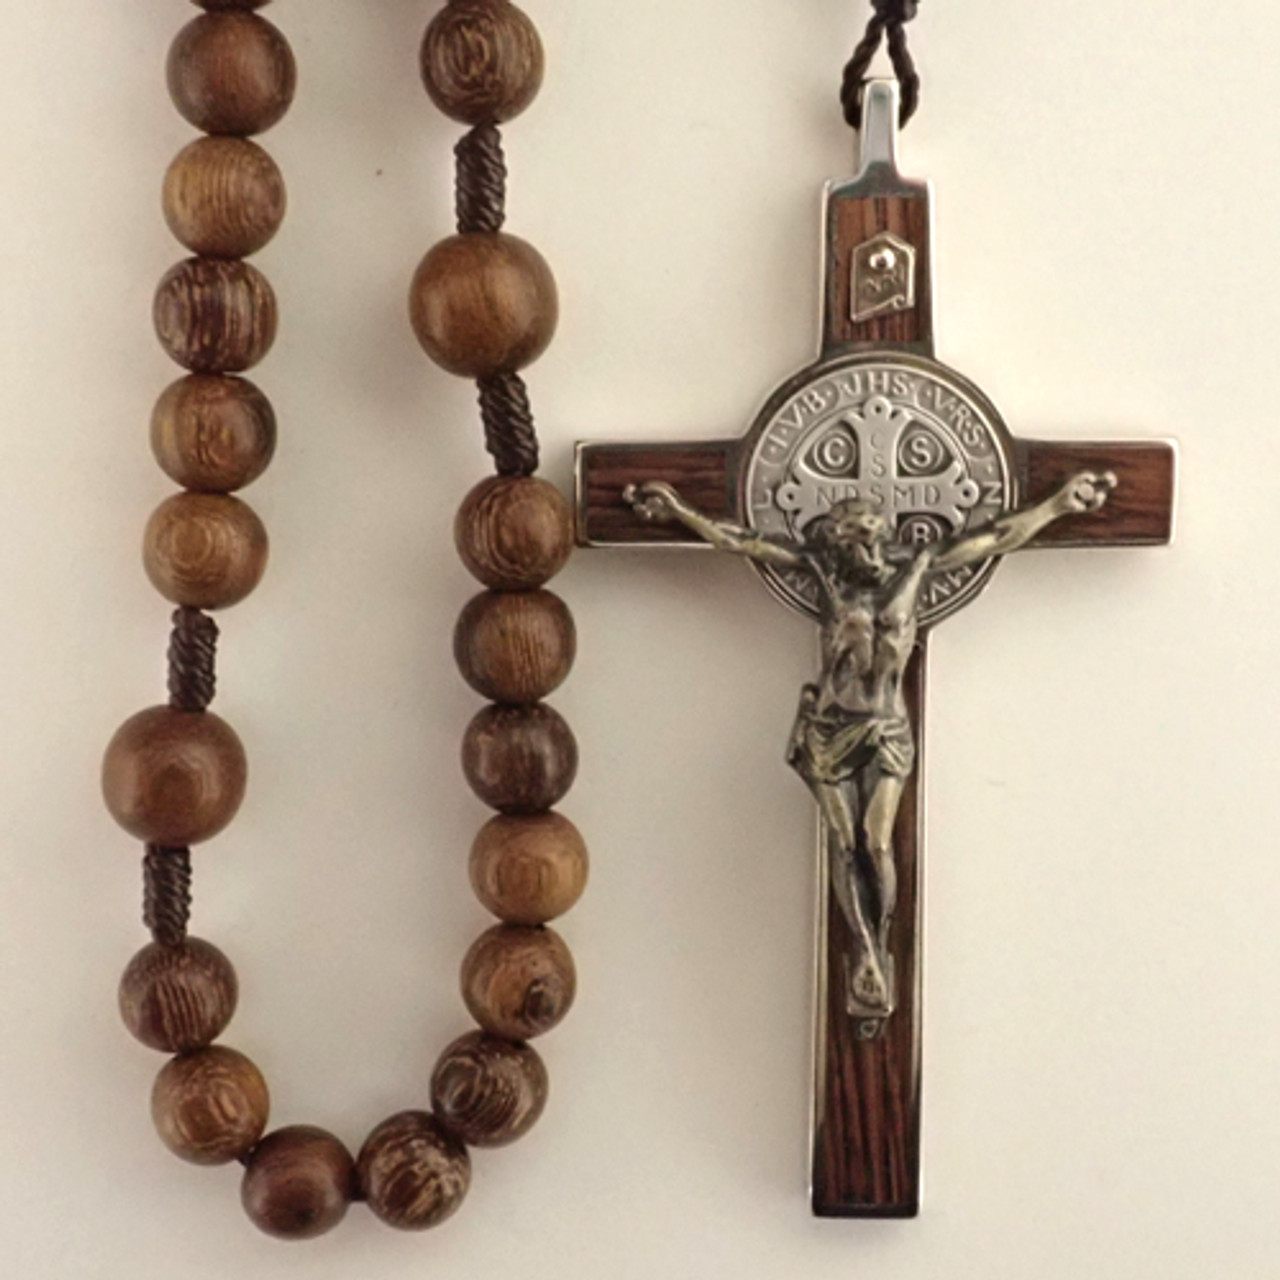 https://cdn11.bigcommerce.com/s-7251z/images/stencil/1280x1280/products/4726/9027/st-benedict-cord-rosary__09212.1628783415.jpg?c=2